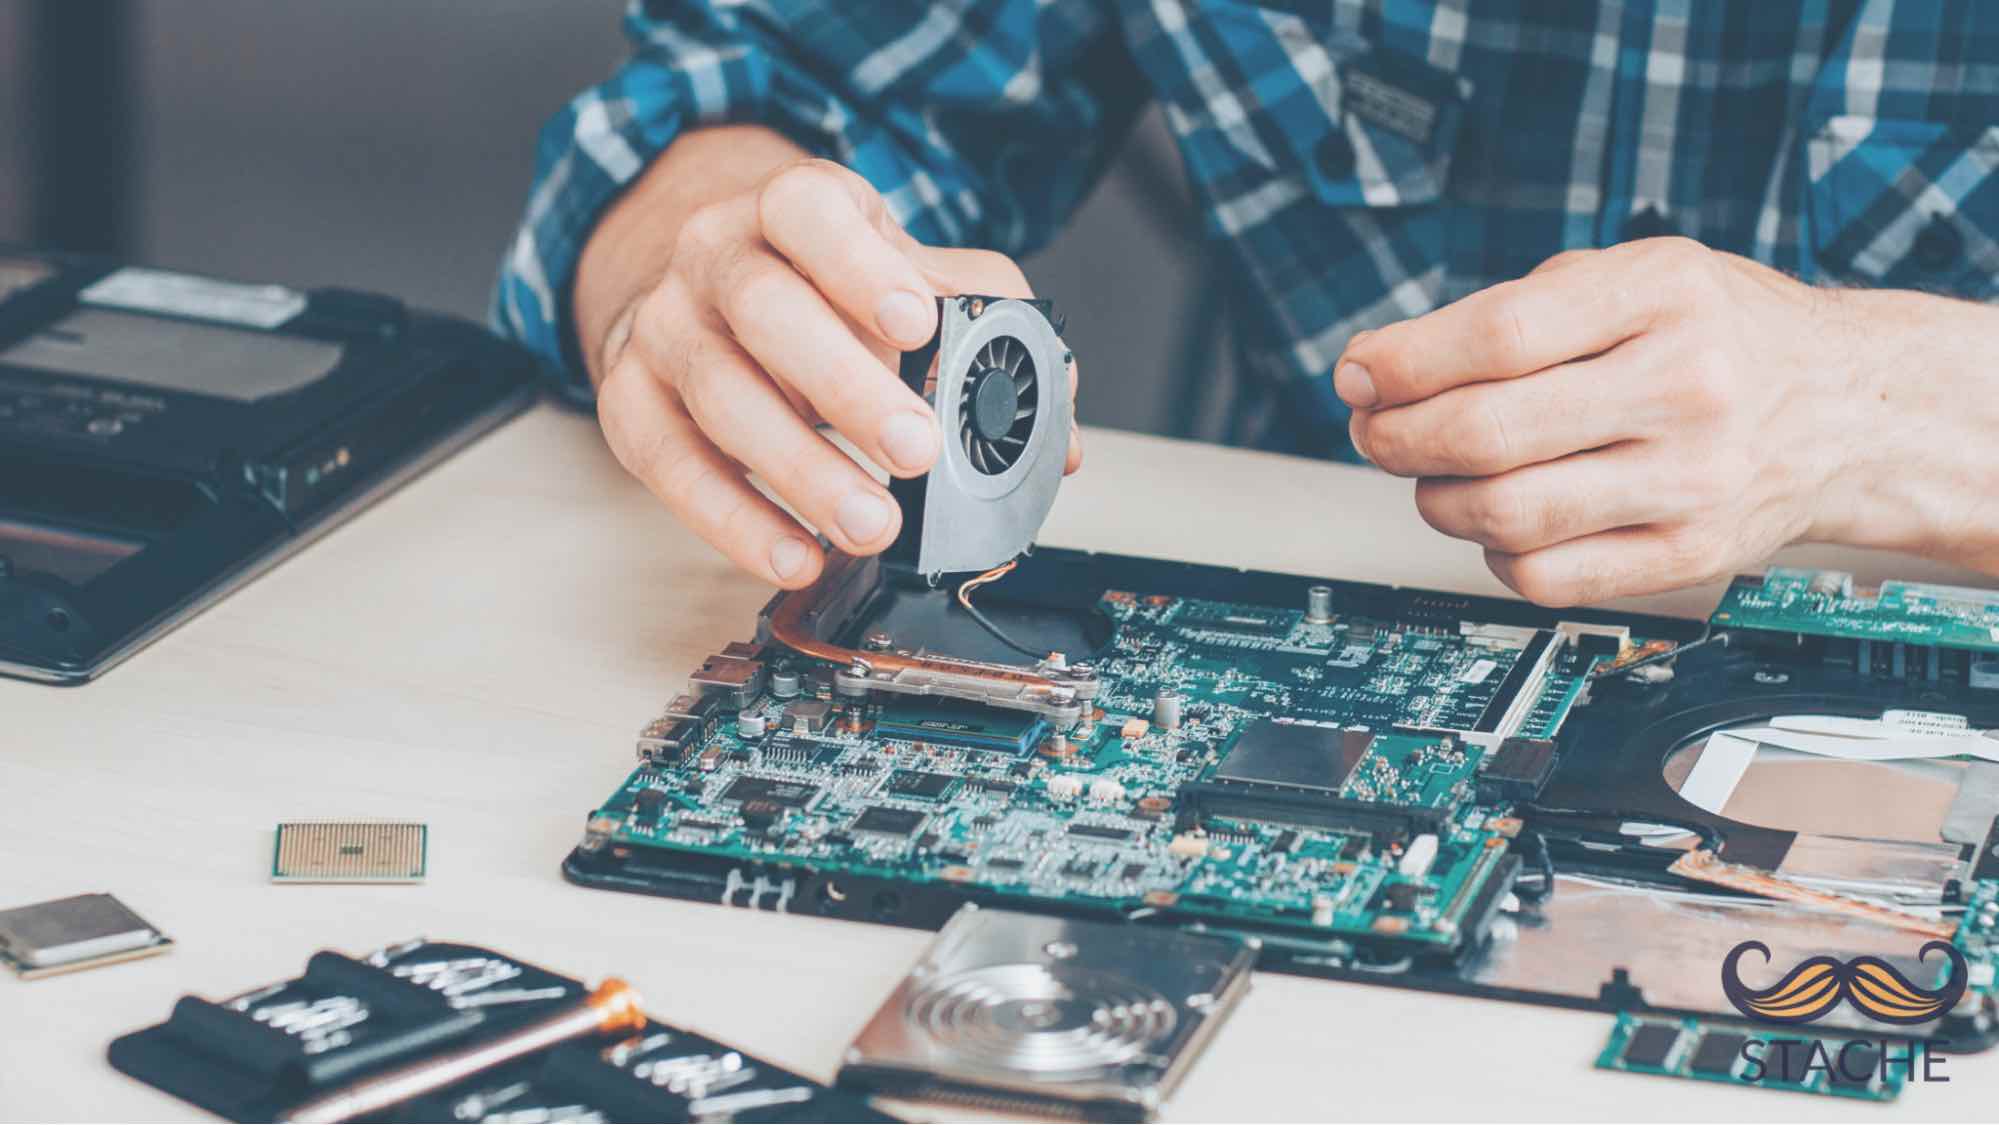 how to start a computer repair business in 2022